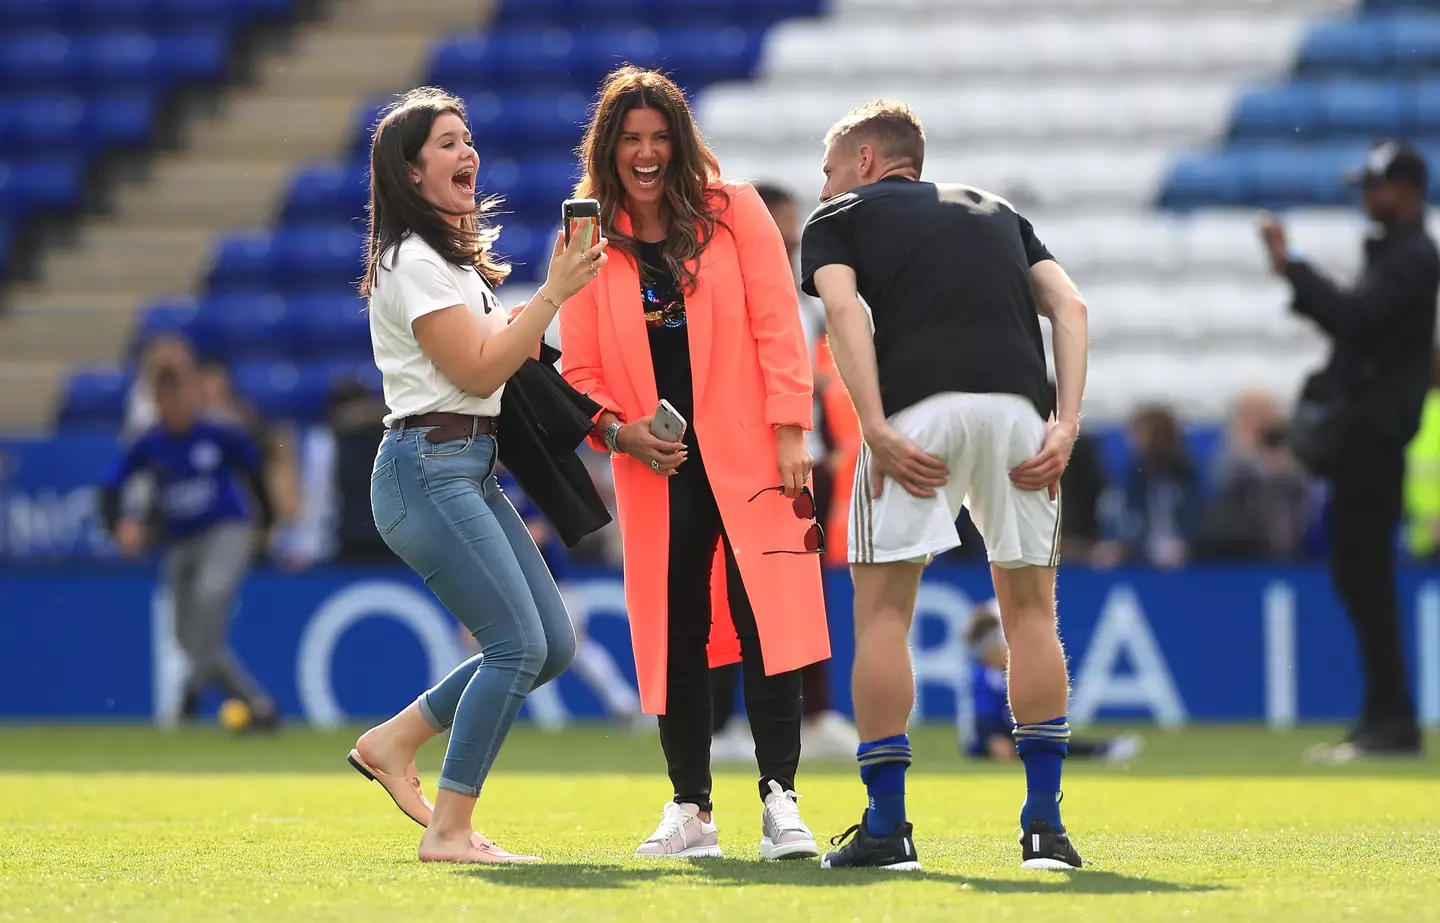 Leicester City's Jamie Vardy and Rebekah Vardy during the Premier League match at the King Power Stadium, Leicester, credit Alamy.